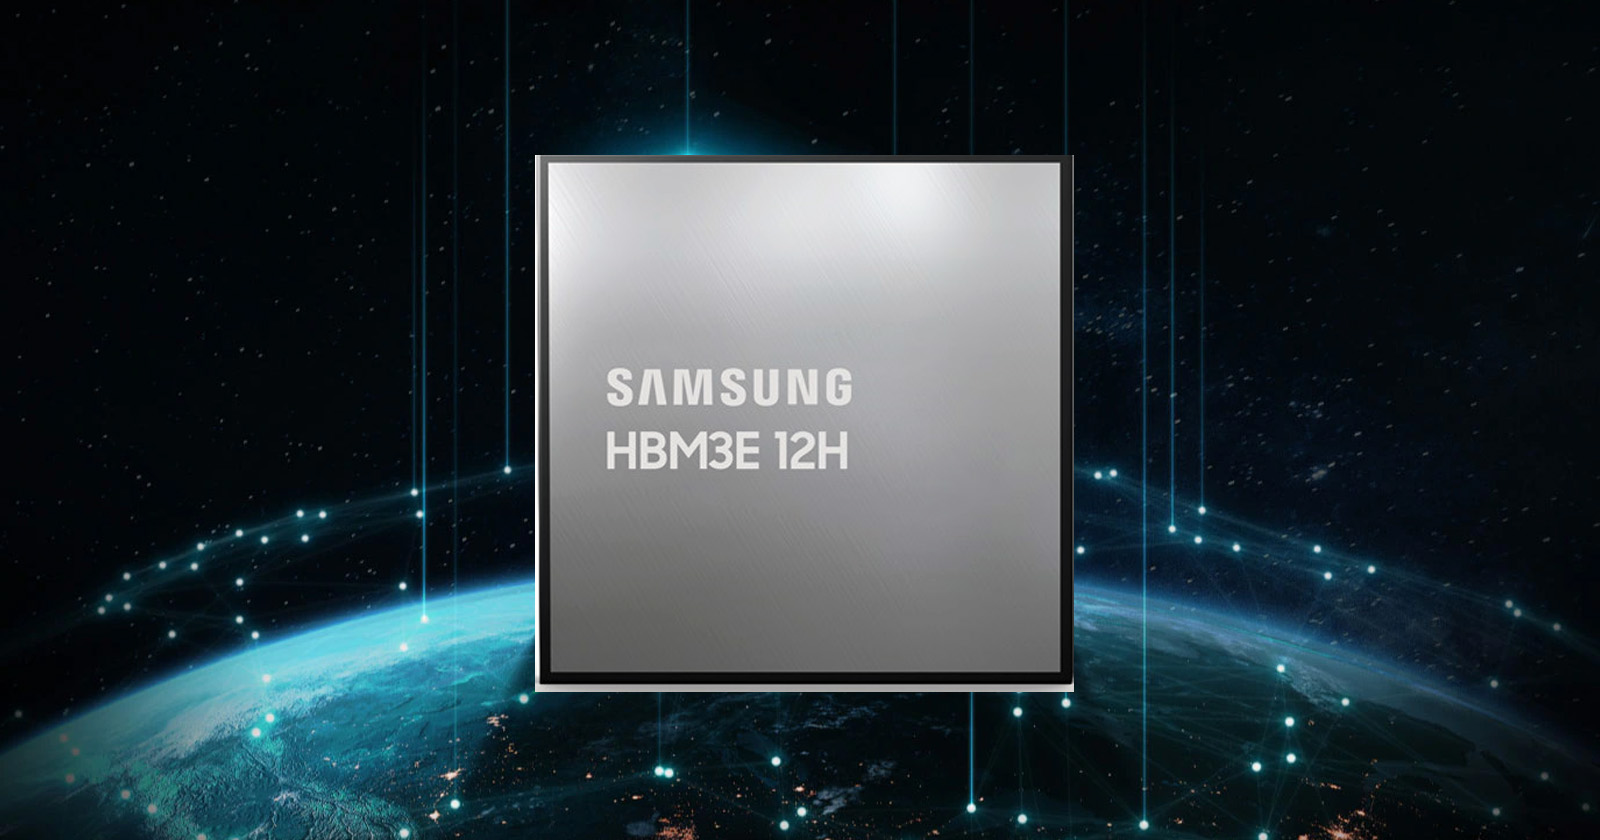 Samsung is preparing to usher in the era of supercomputers!